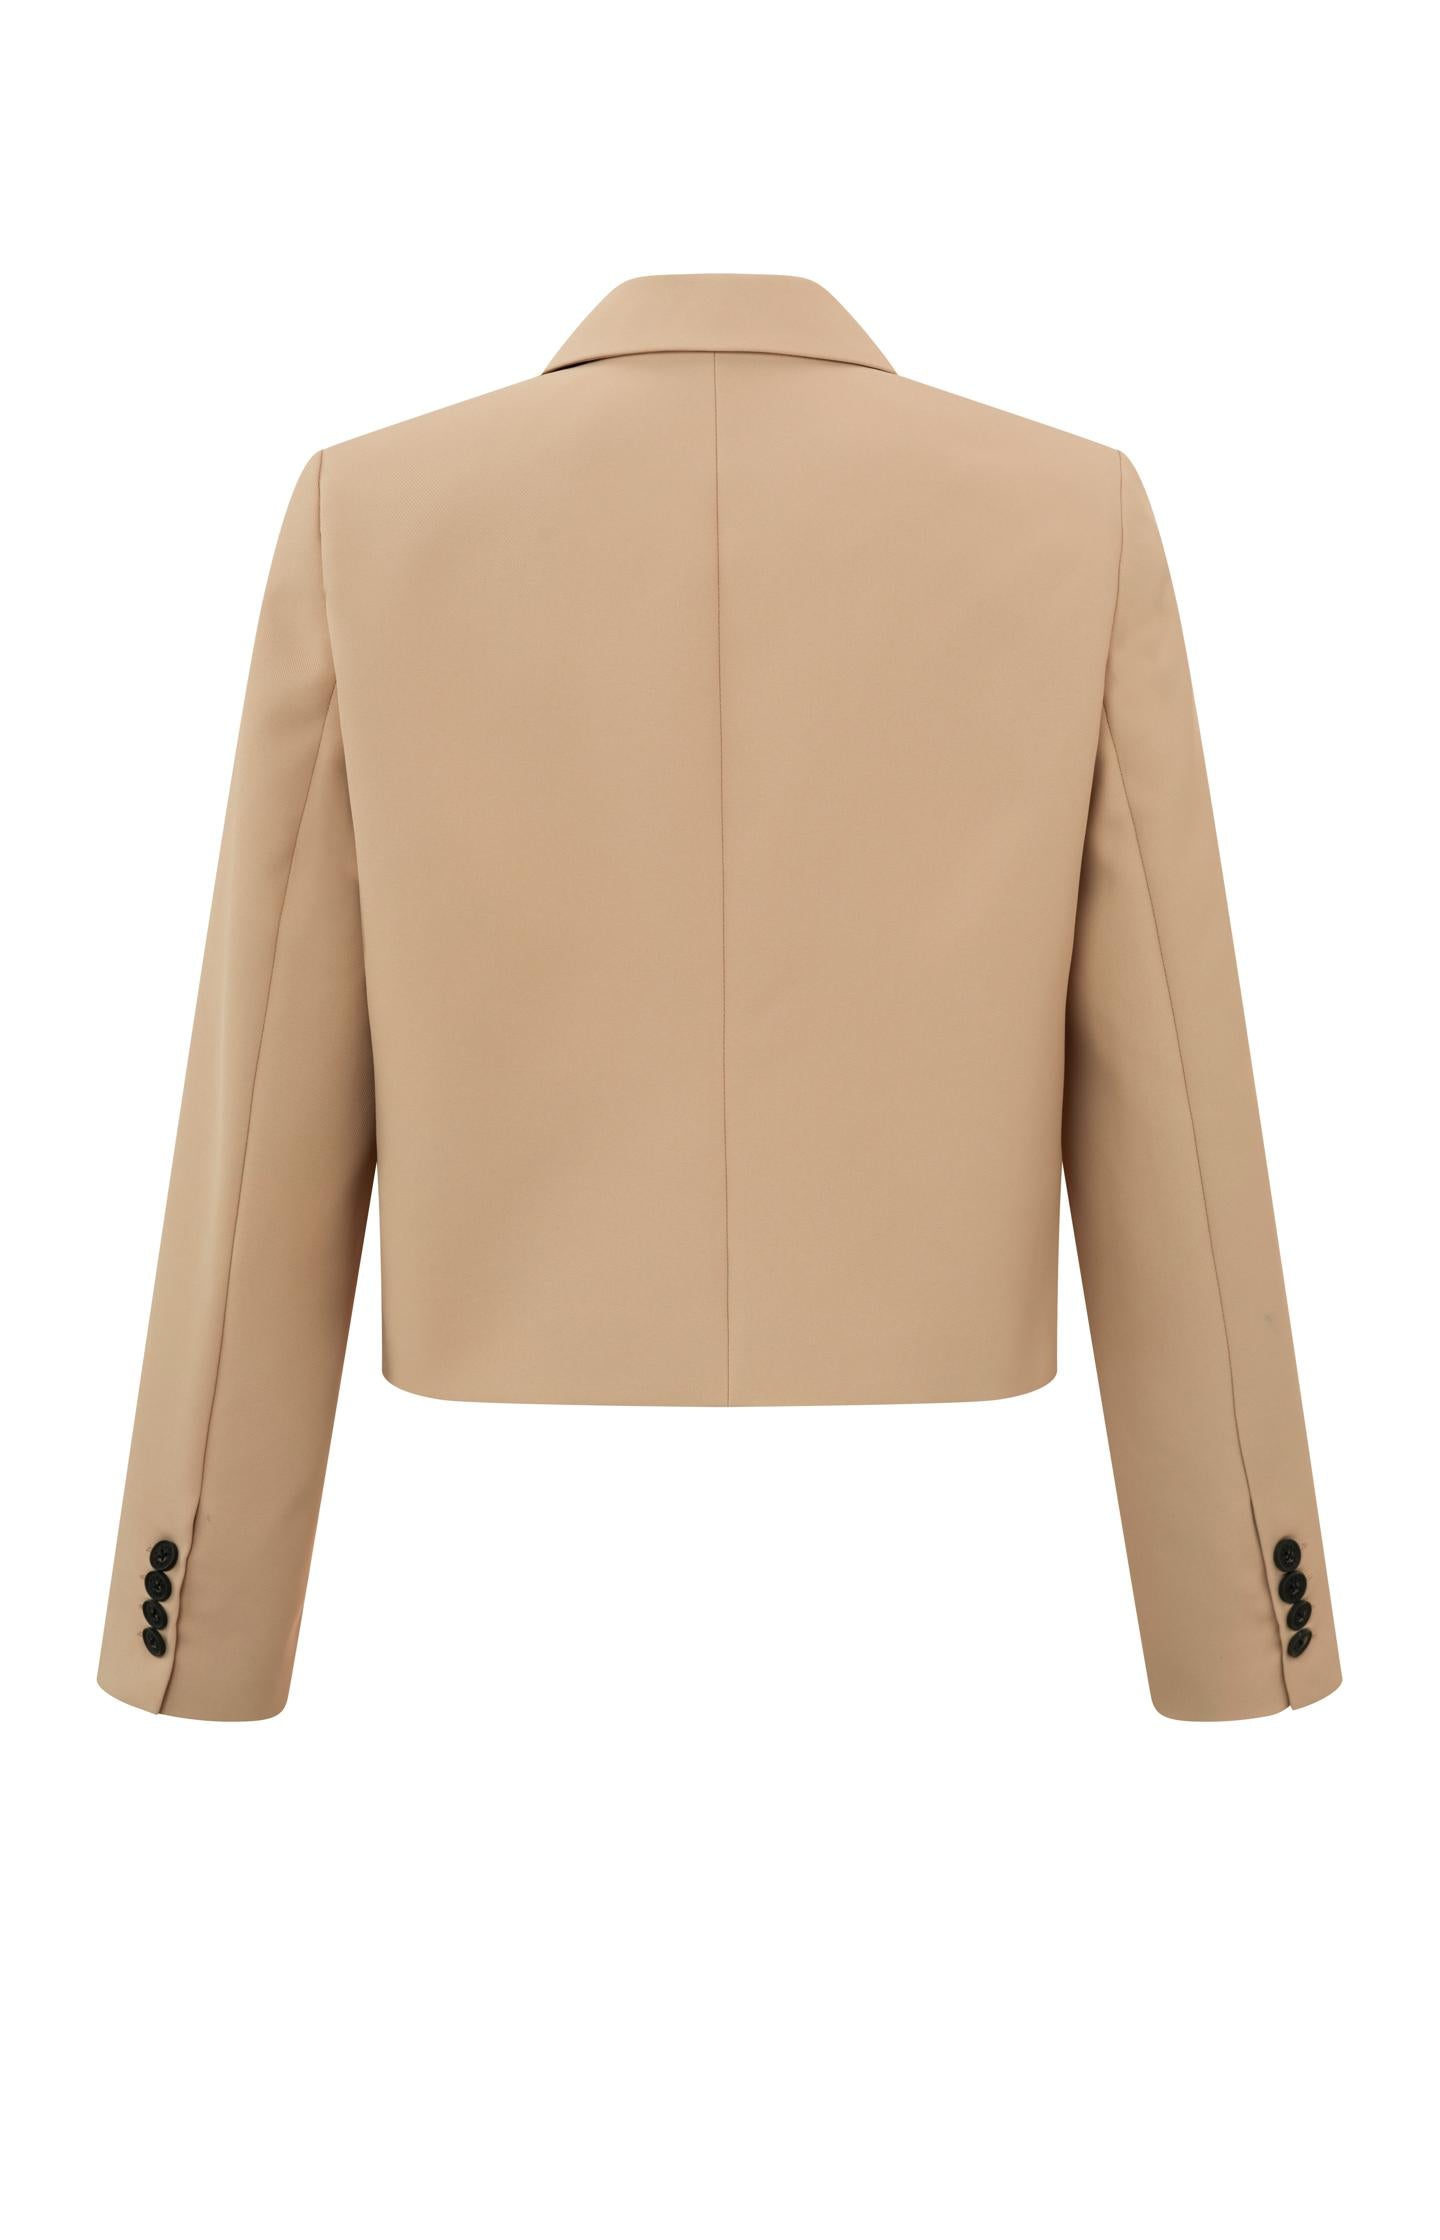 Cropped double breasted blazer with long sleeves and collar - Tannin Brown